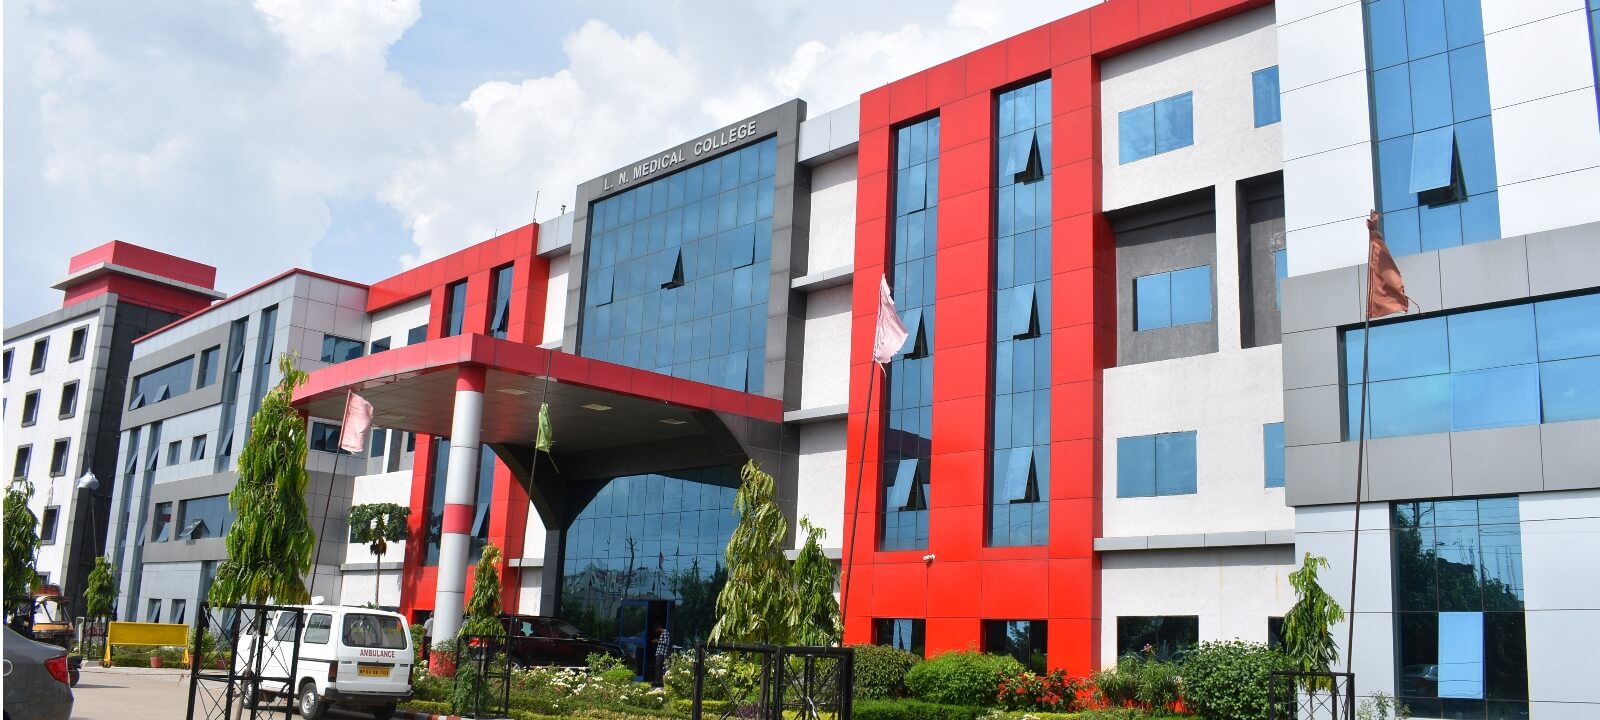 LN Medical College Bhopal 2022-23: Admission, Course, Fees, Cutoff, Counselling ,Contact Number